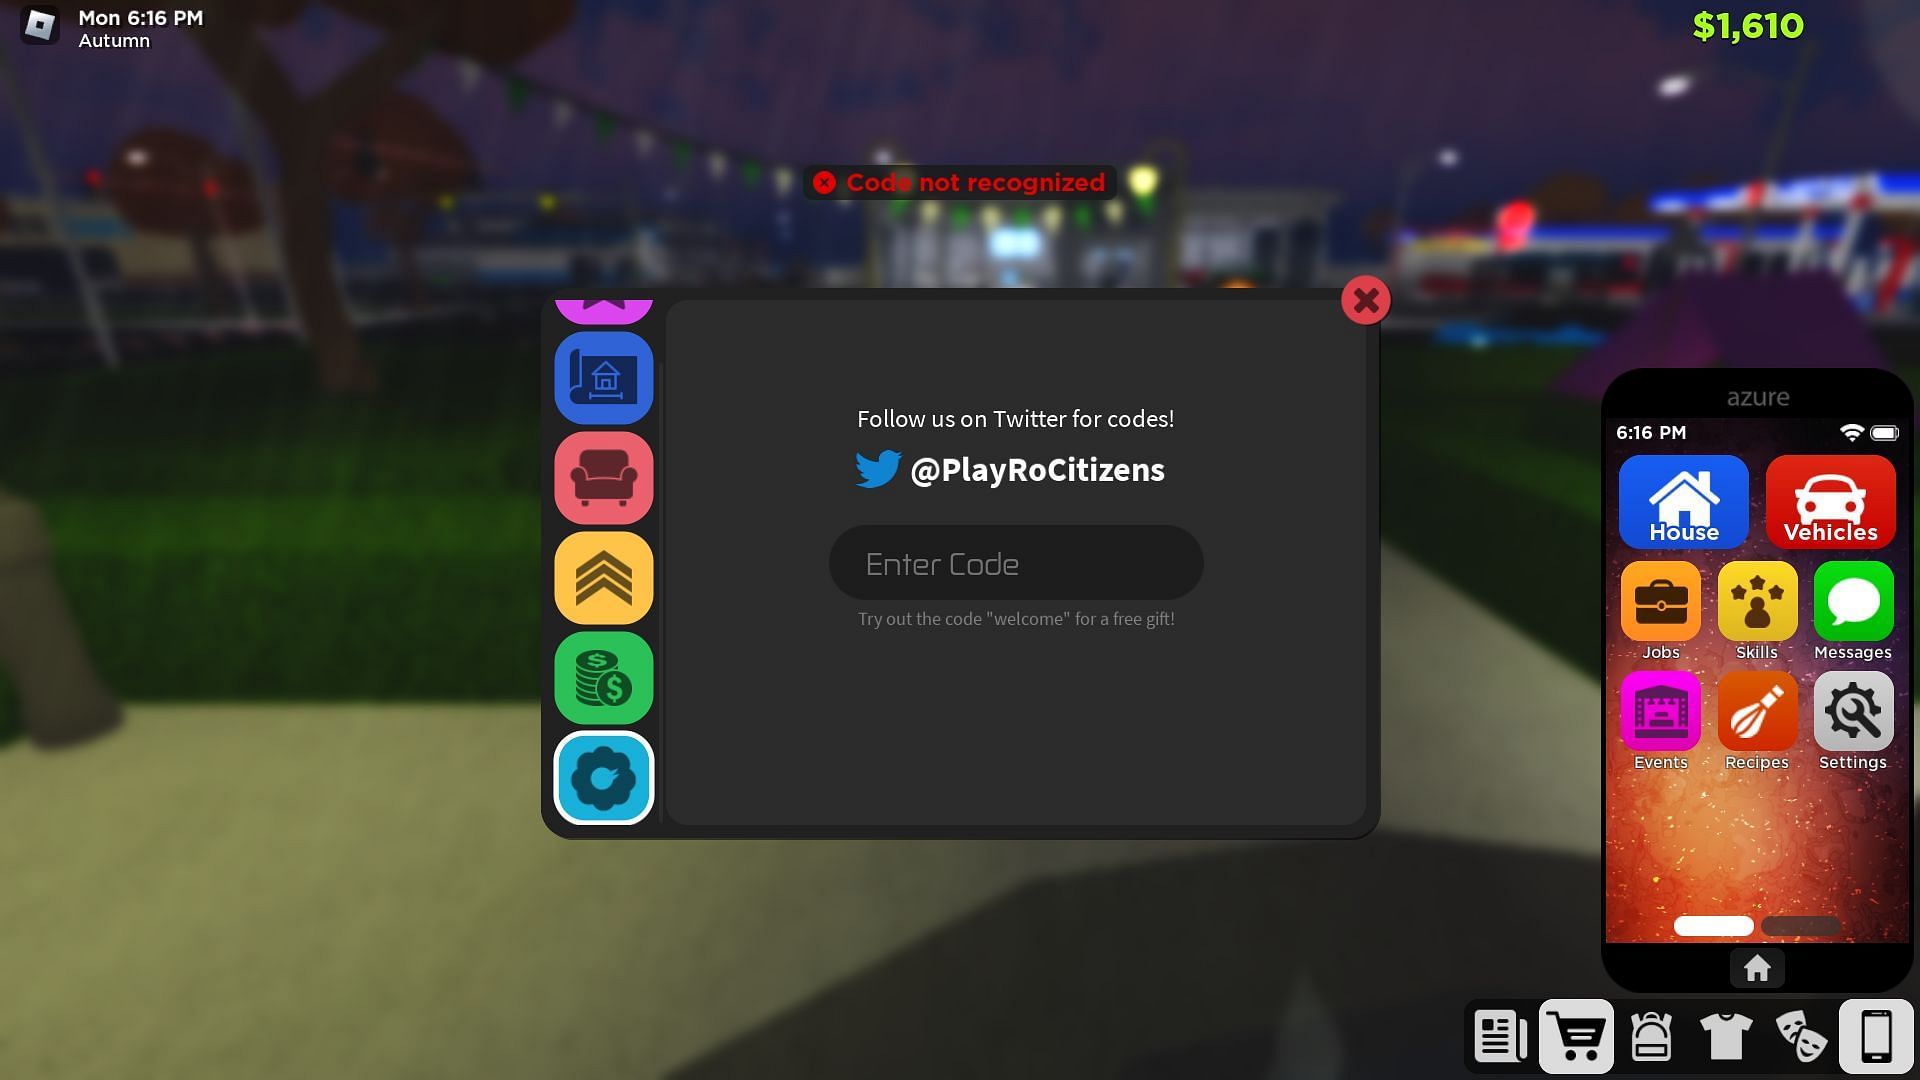 Troubleshooting codes for RoCitizens (Image via Roblox)